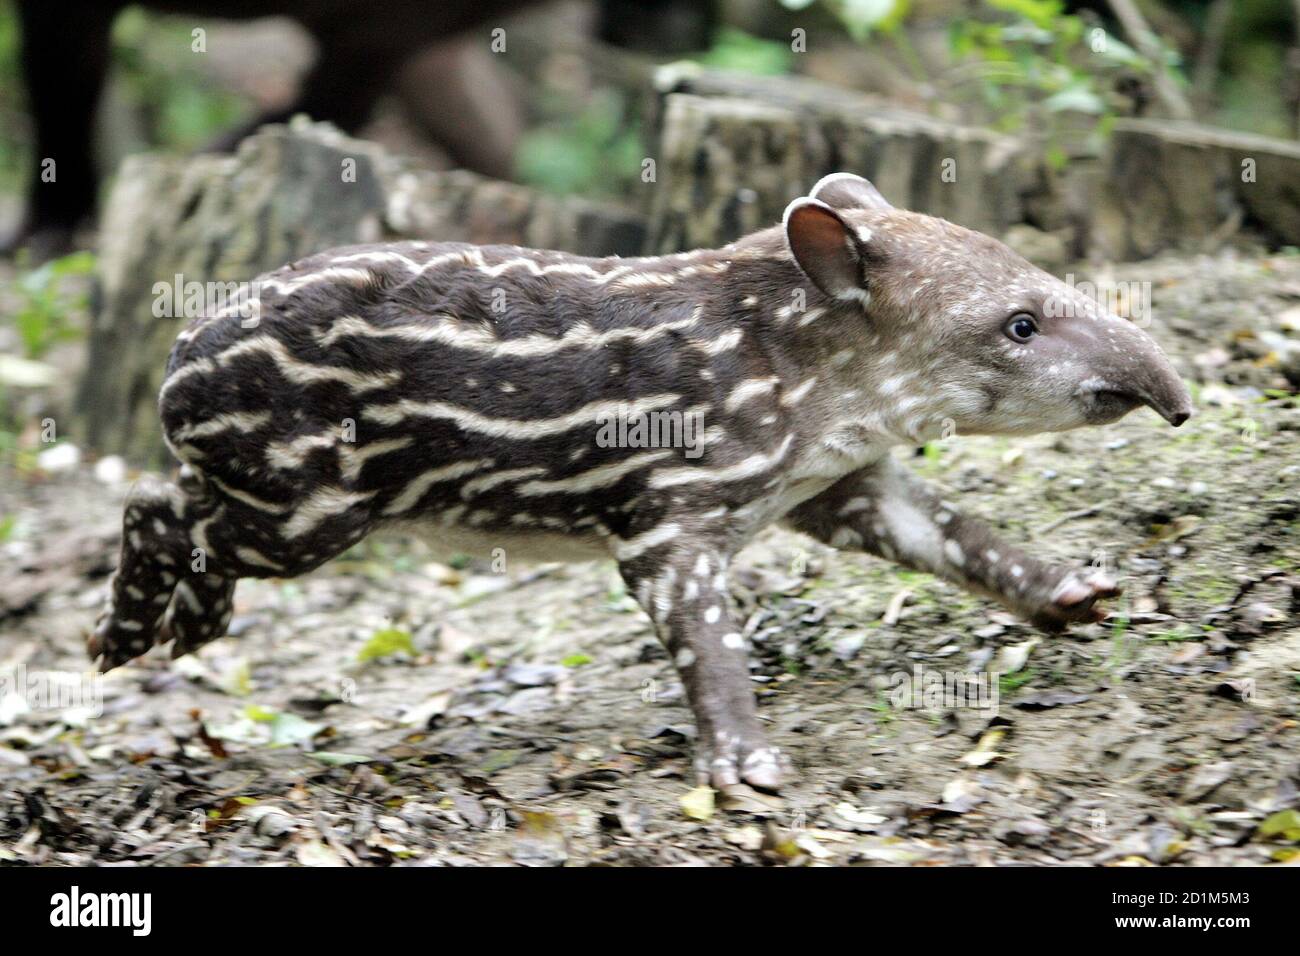 Tapir Enclosure High Resolution Stock Photography and Images - Alamy